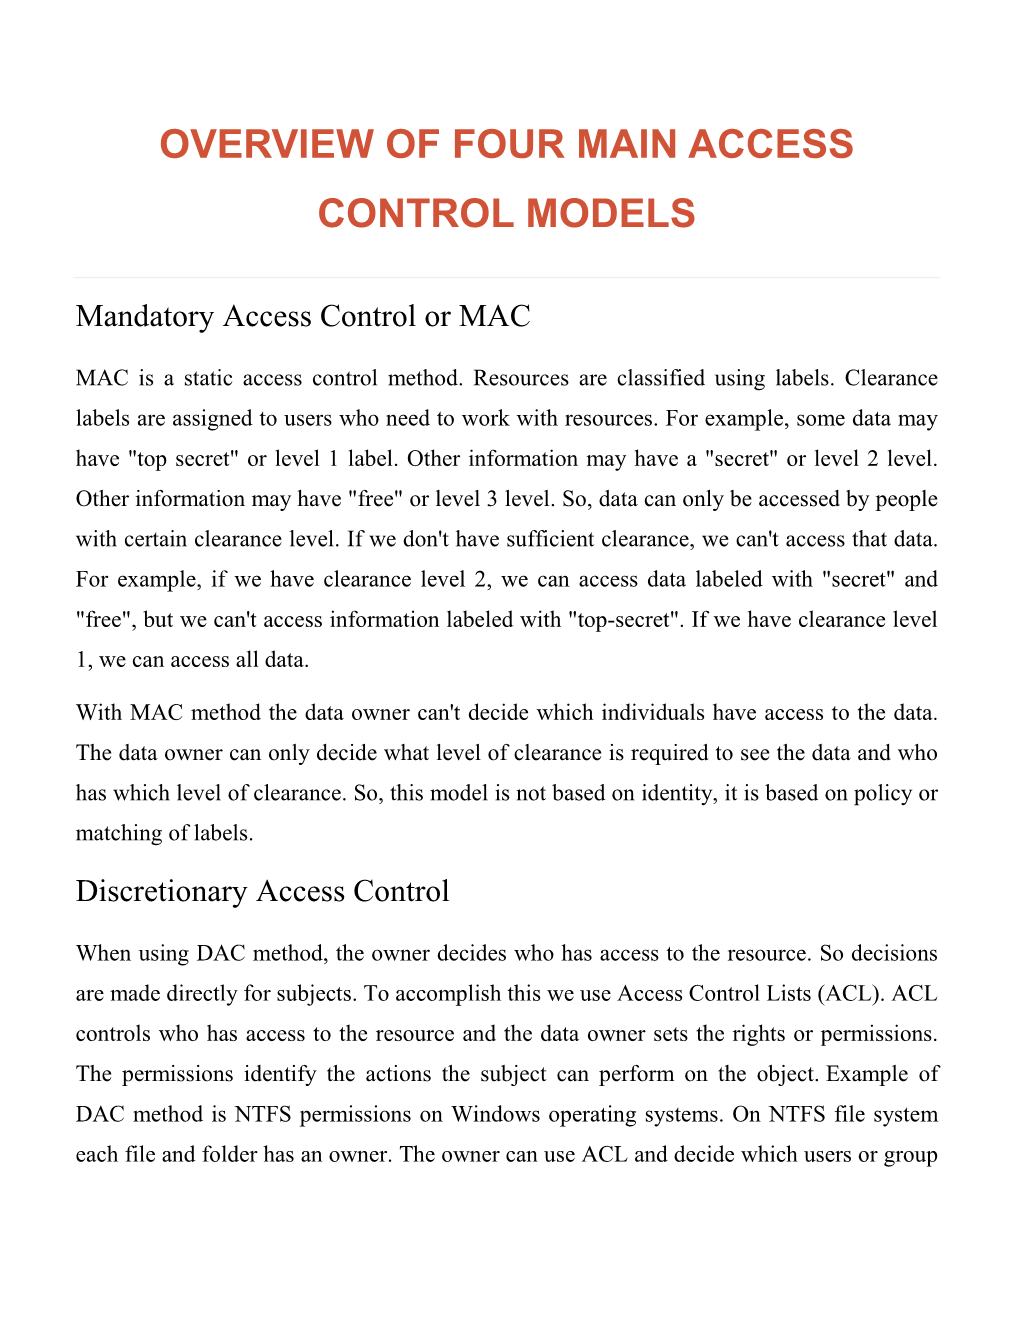 Overview of Four Main Access Control Models